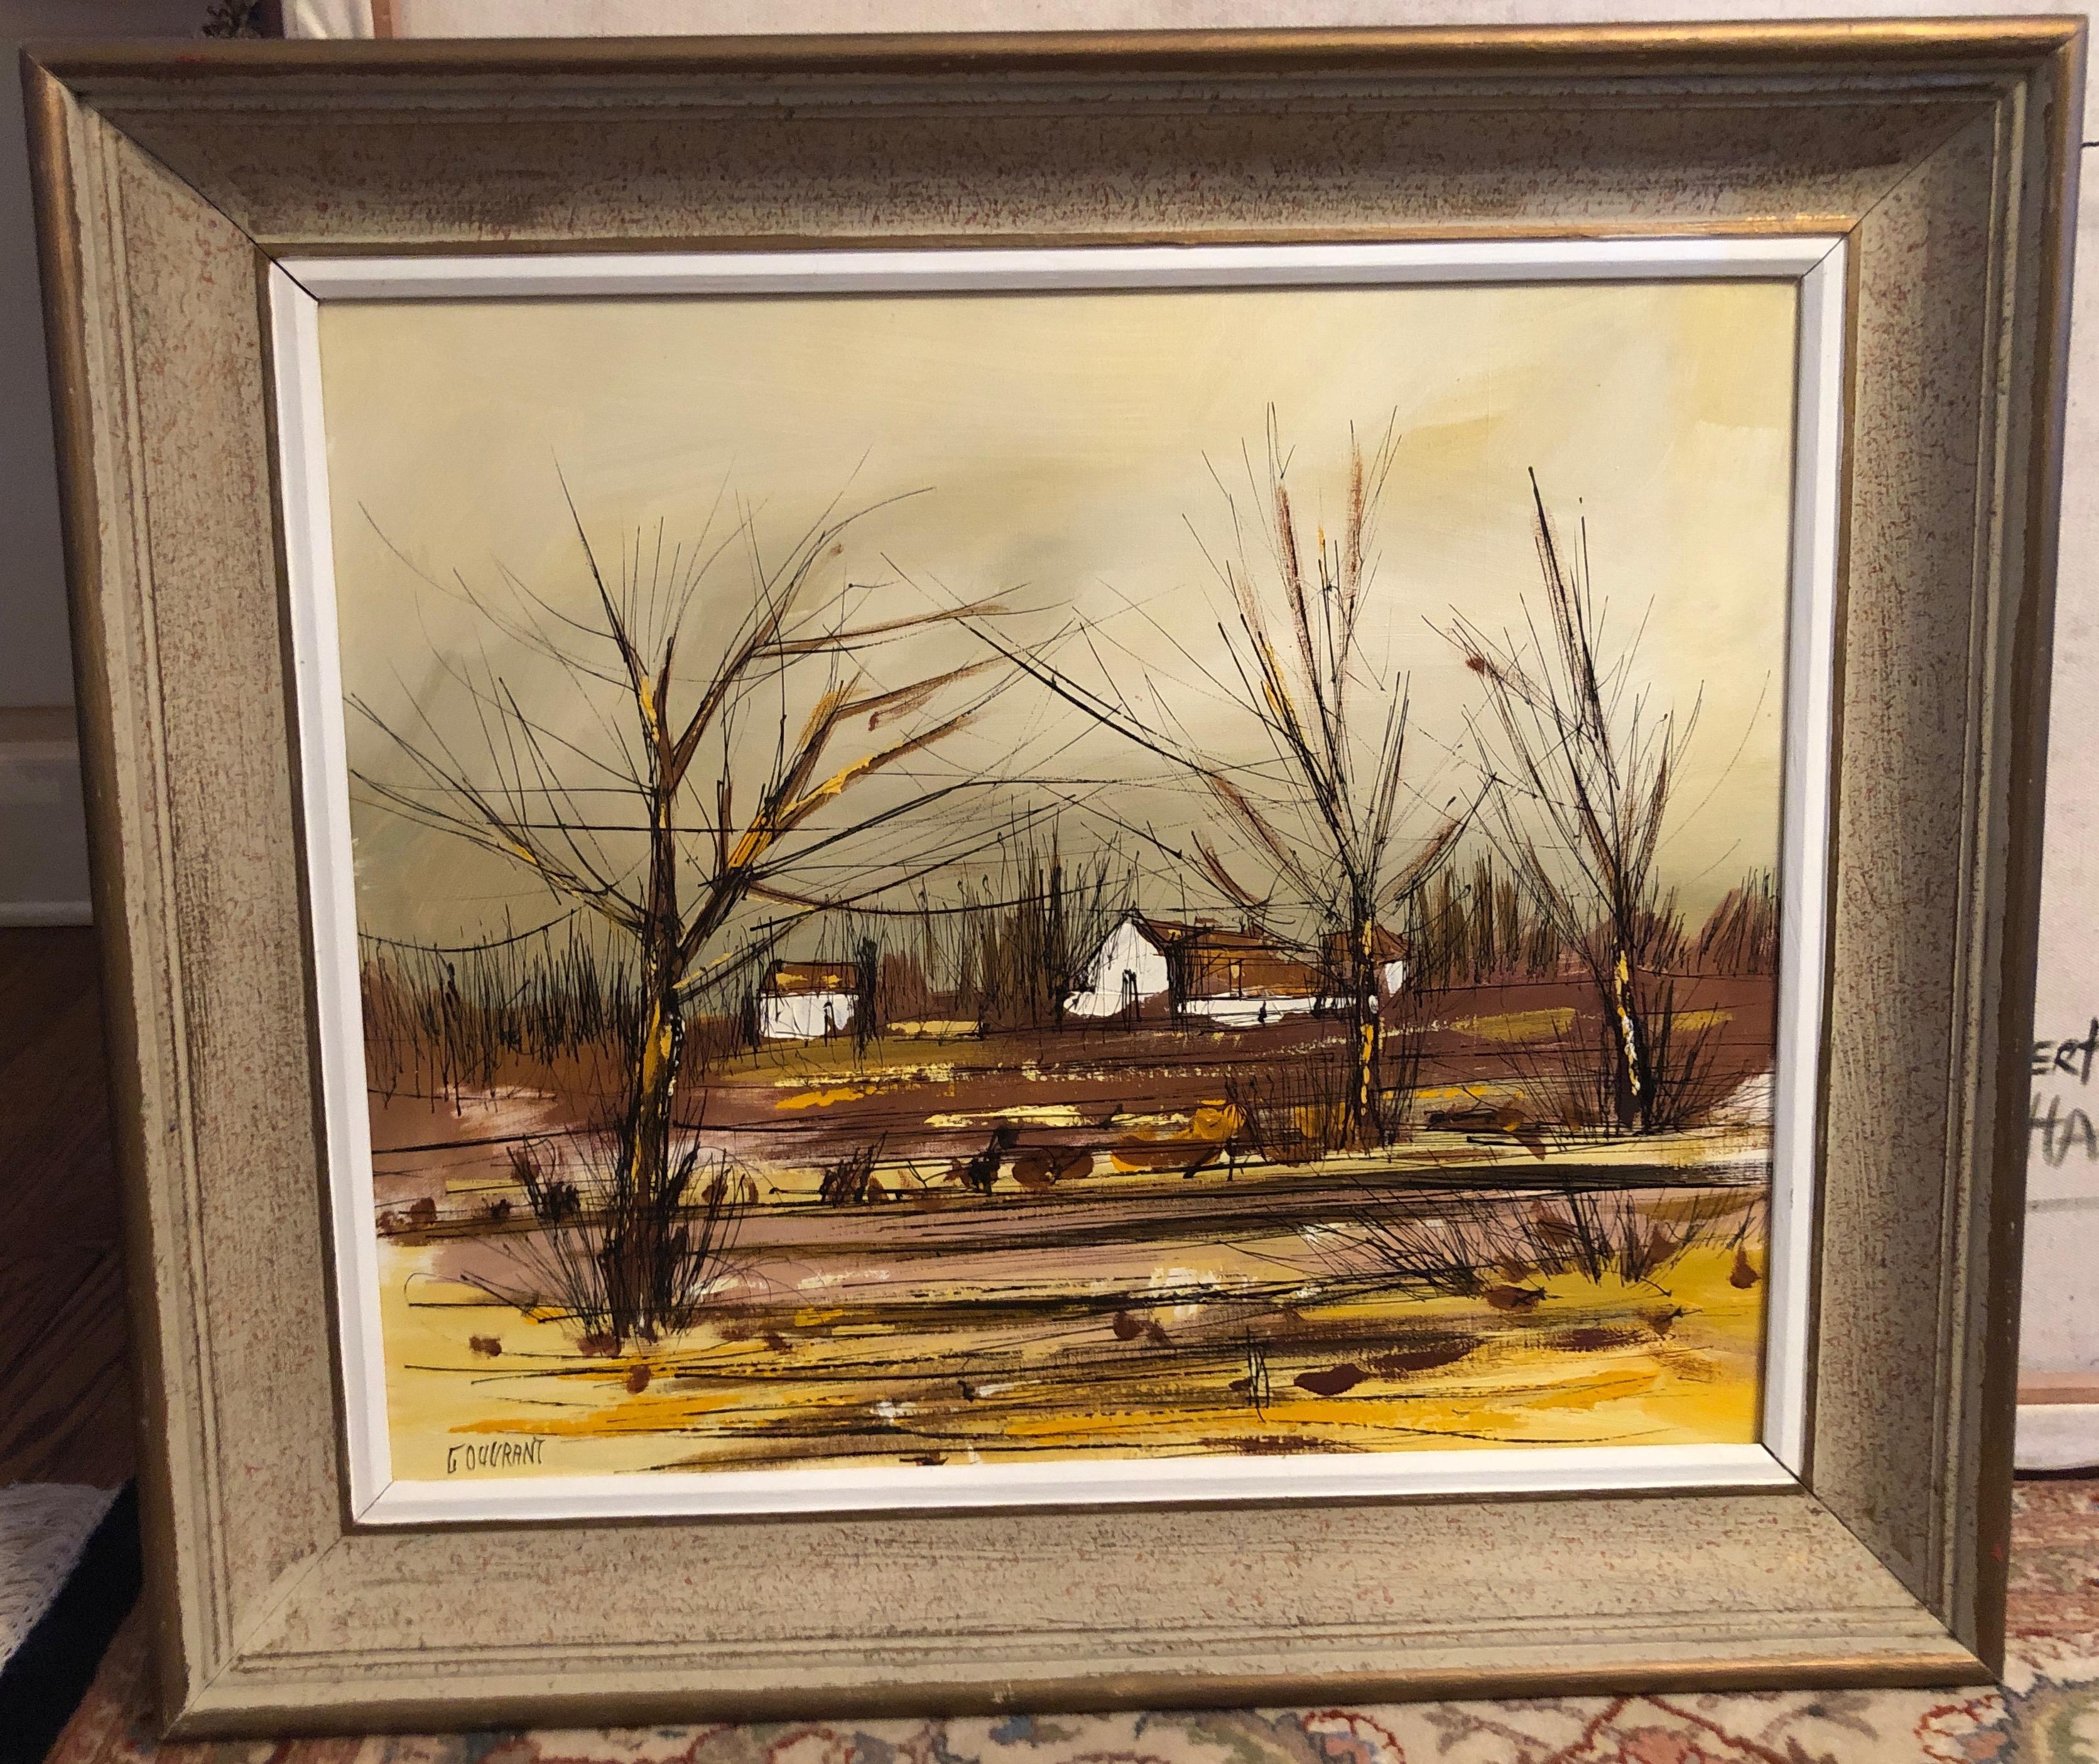 Original landscape painting by Gerard Gouvrant, inscribed on the back 